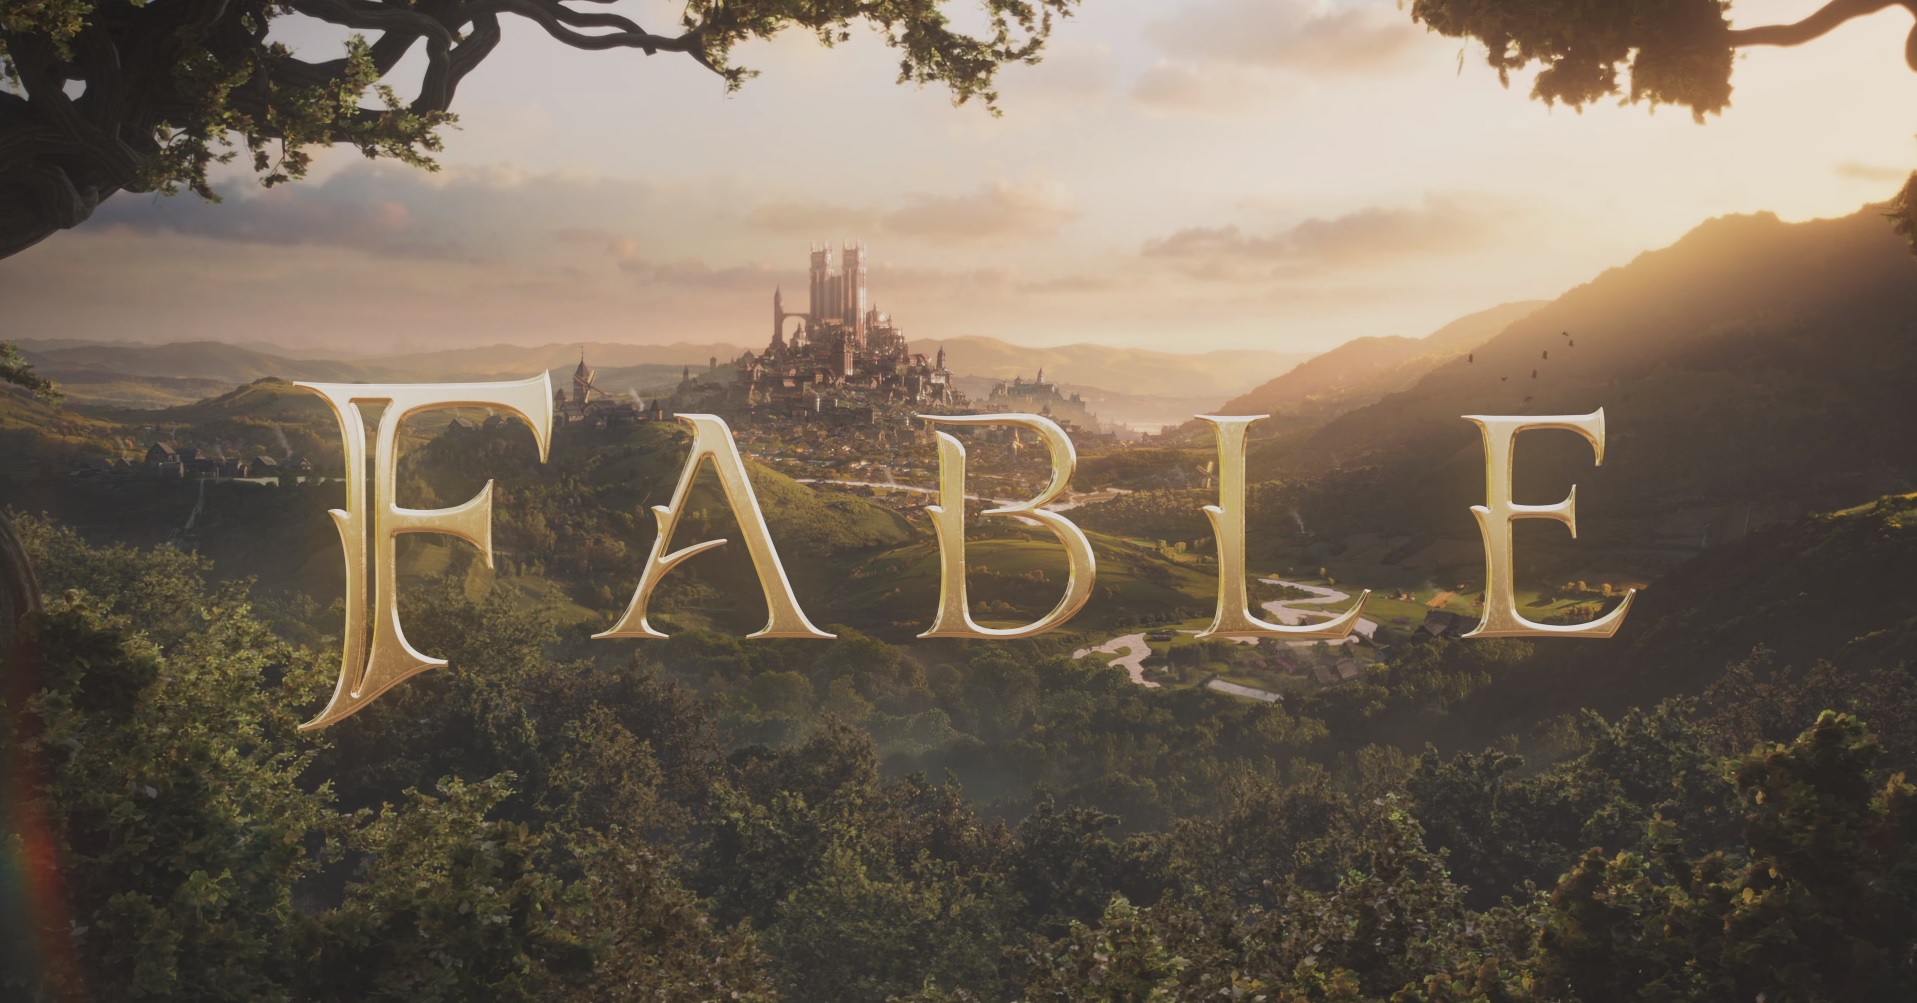 Fable 4 title - the title floats over a fantasy kingdom in the distance